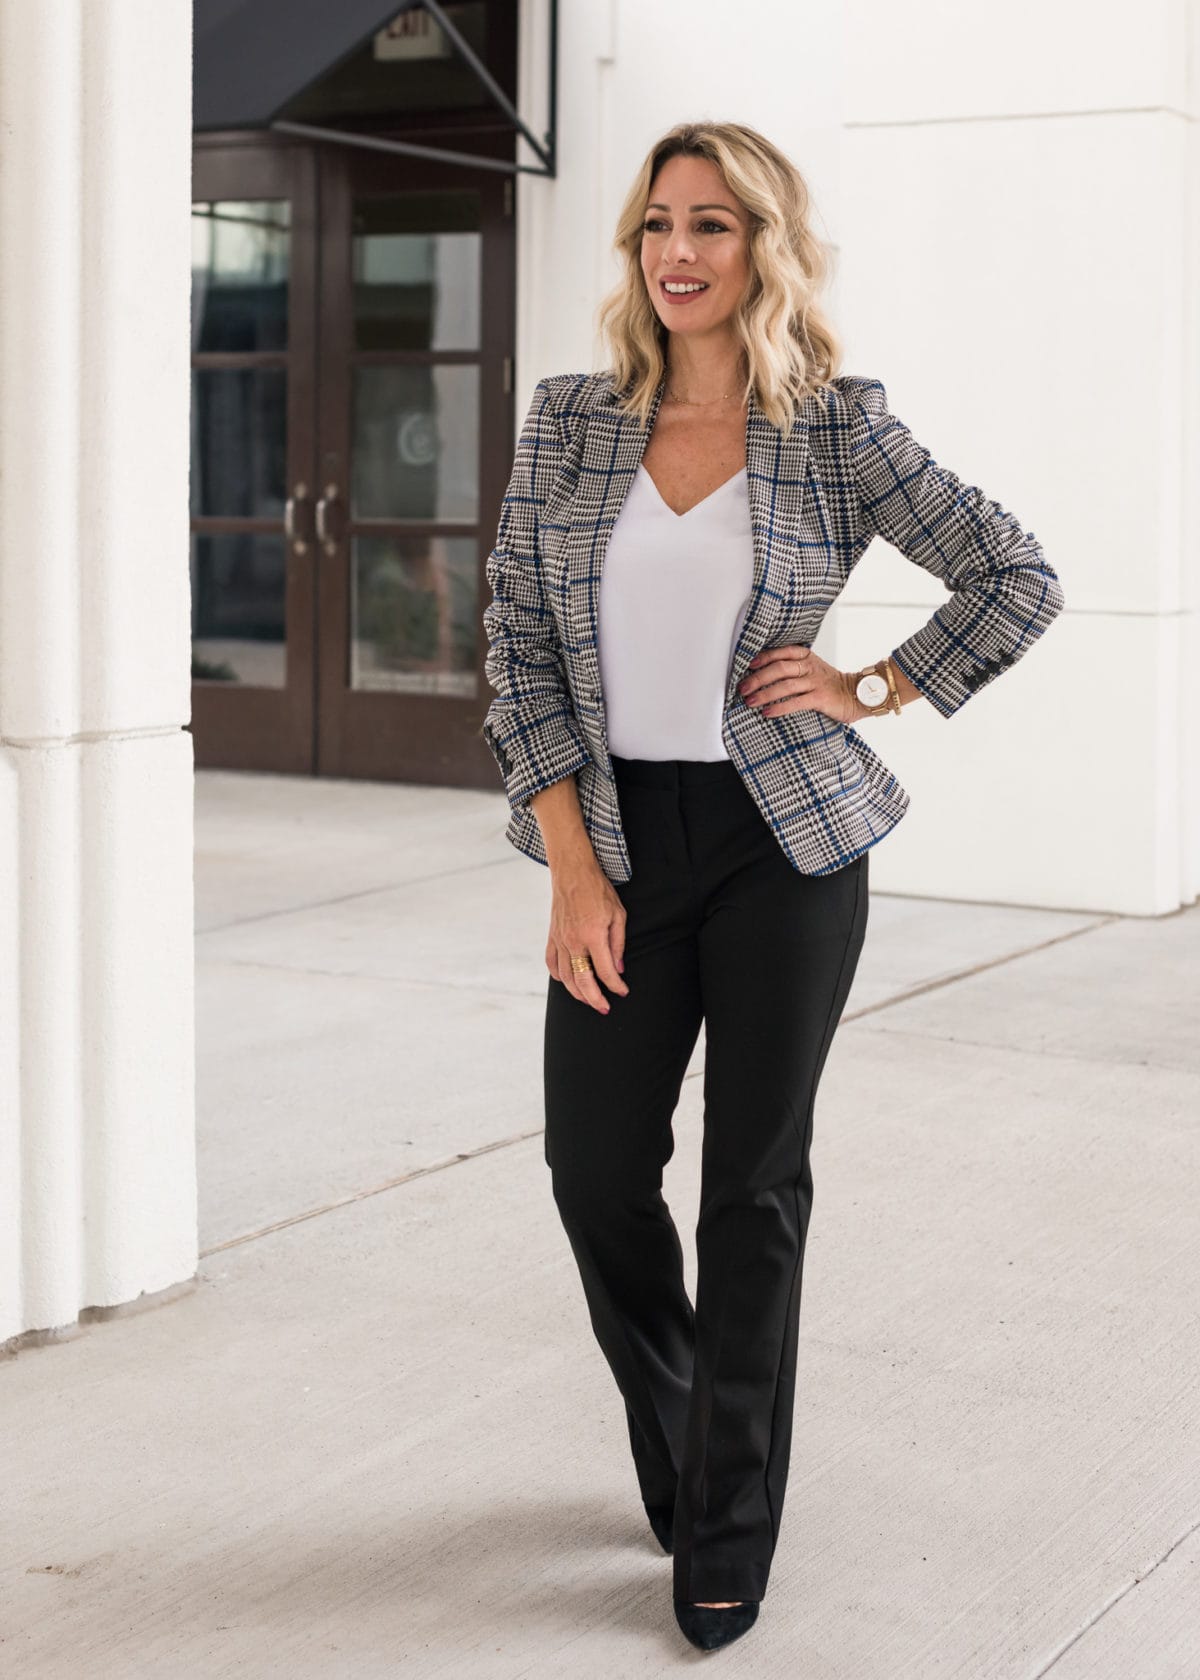 work outfit - plaid blazer and black pants